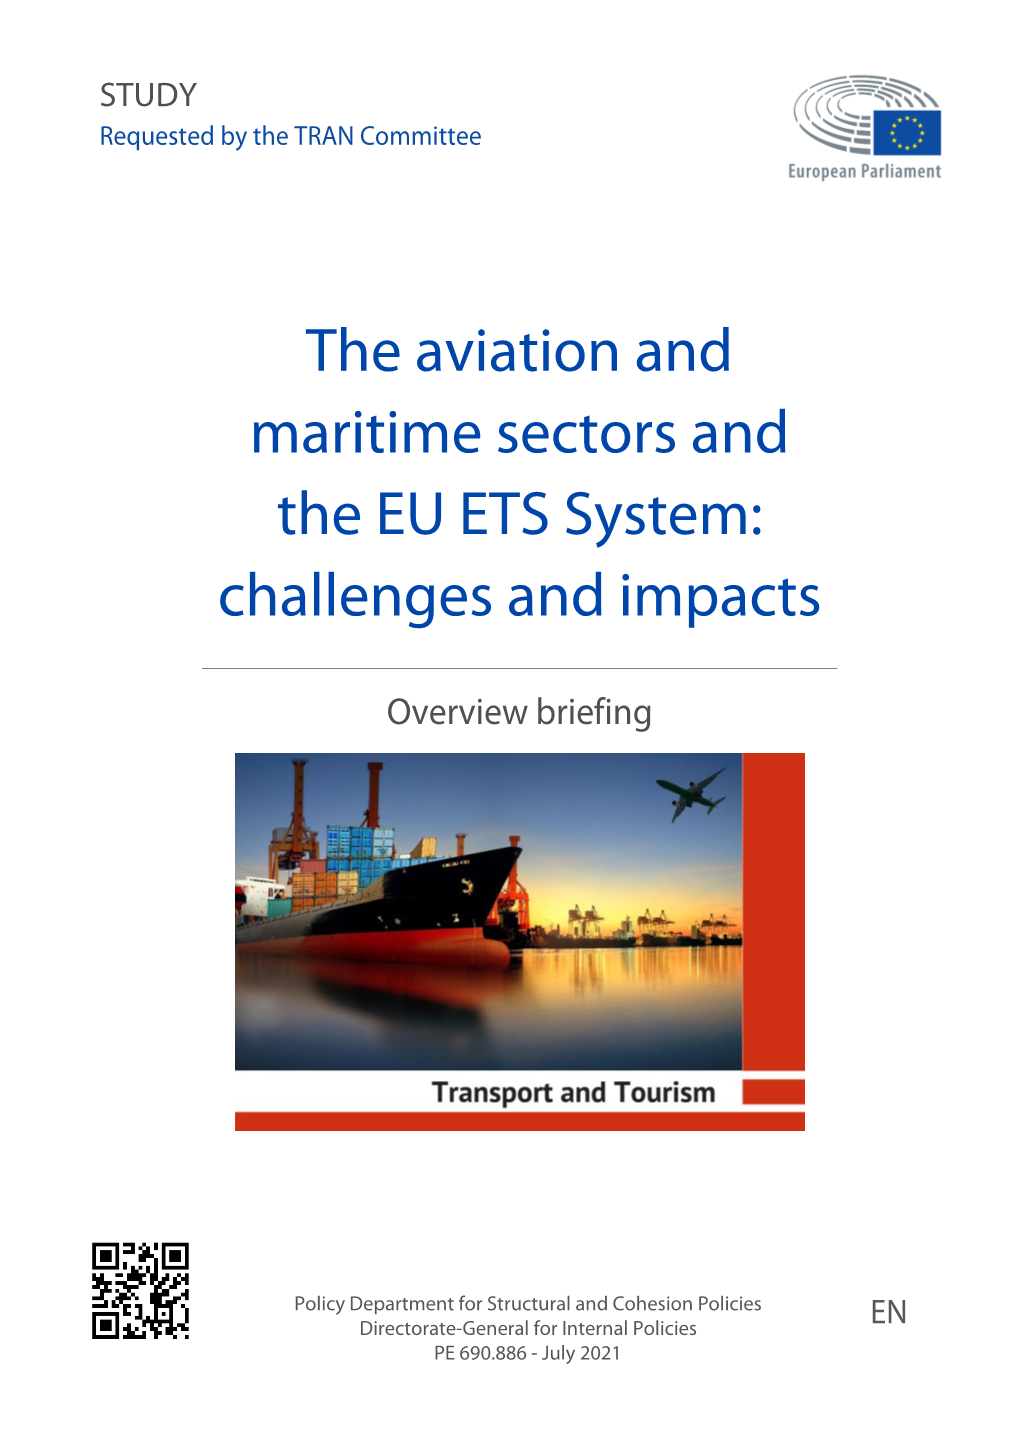 The Aviation and Maritime Sectors and the EU-ETS System: Challenges